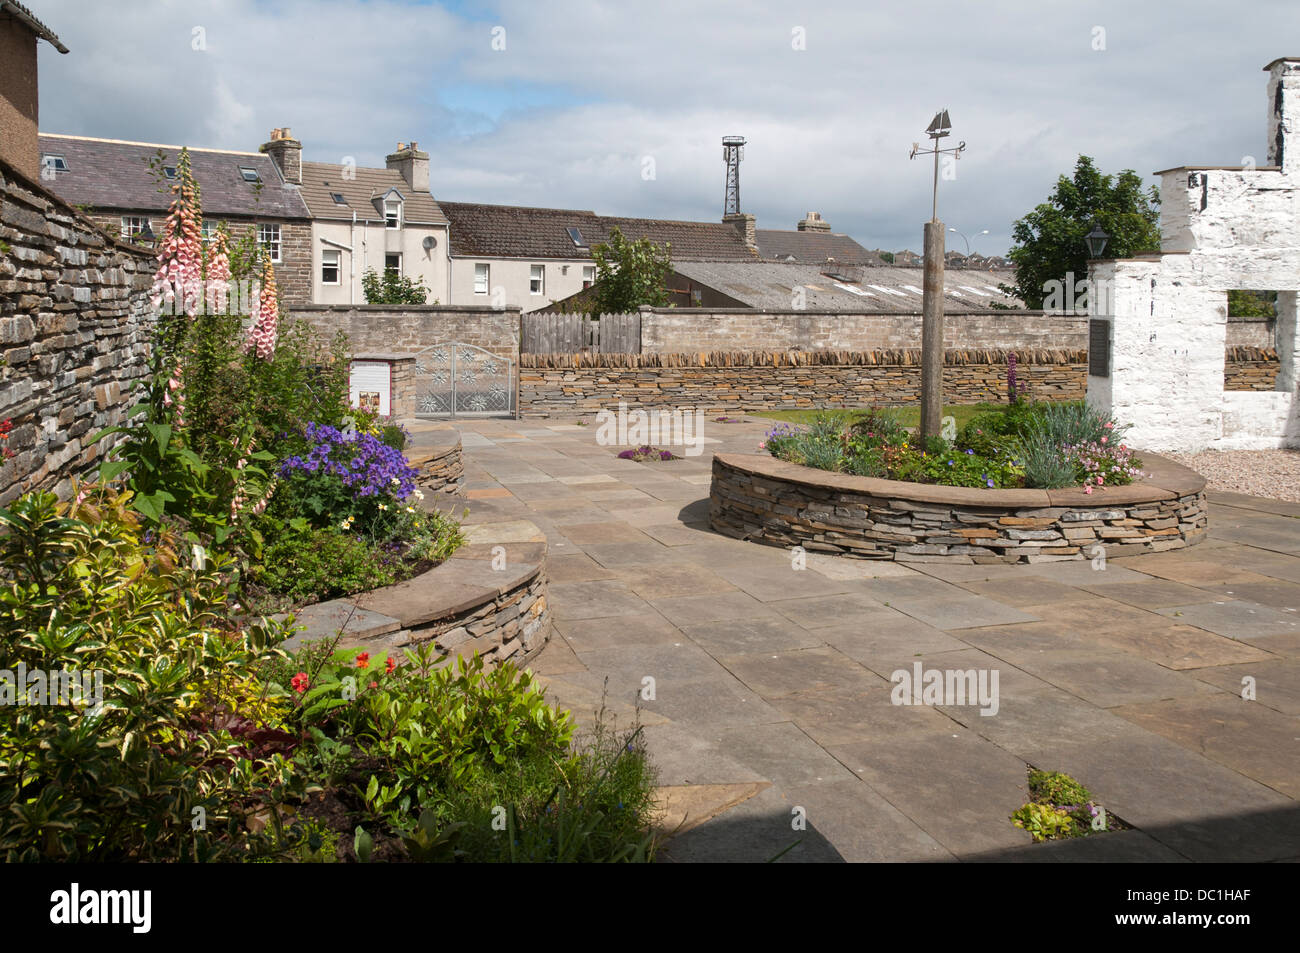 The Memorial Garden (to commemorate victims of World War 2 air raids). Wick, Caithness, Scotland, UK Stock Photo